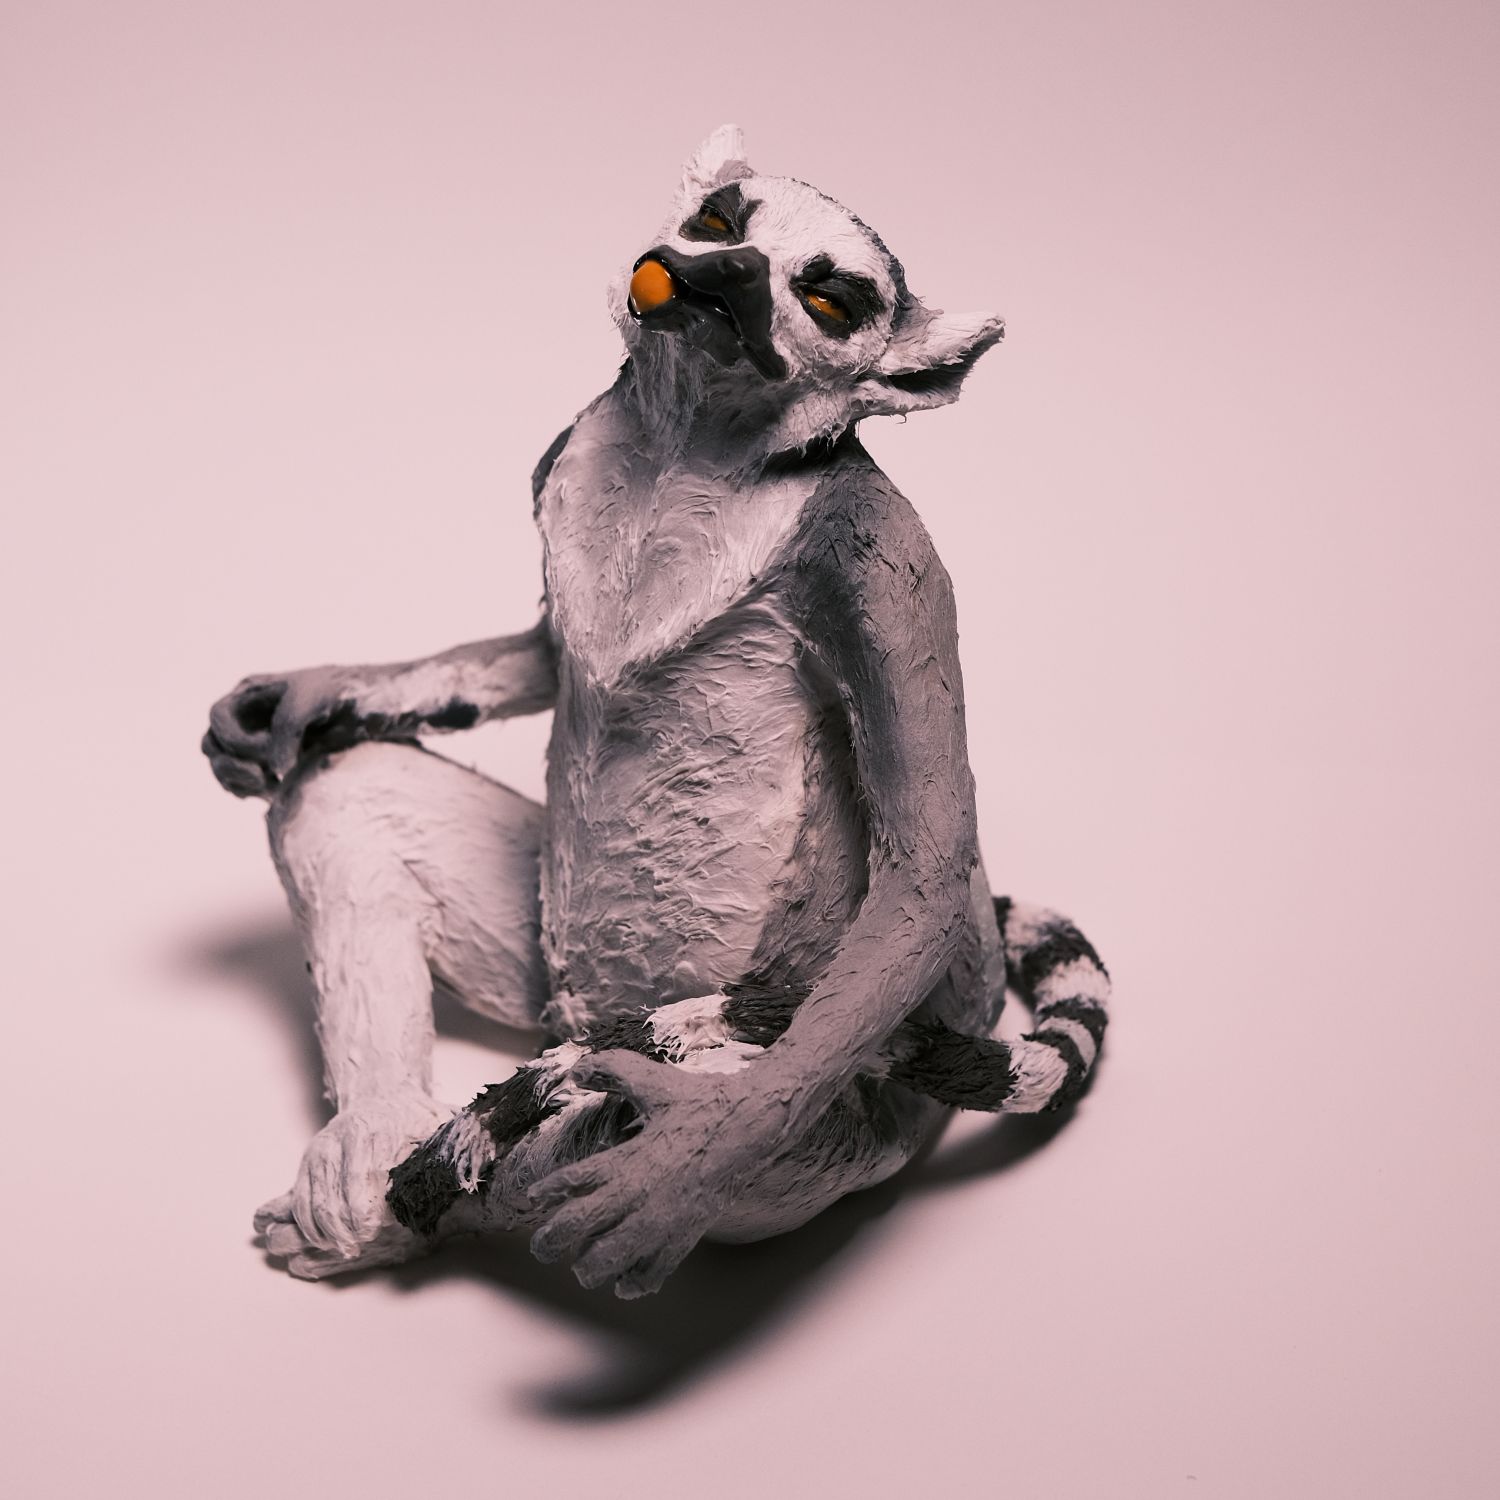 Peidi Wang: Lemur with a fruit in its mouth – Not For Sale Product Image 1 of 5